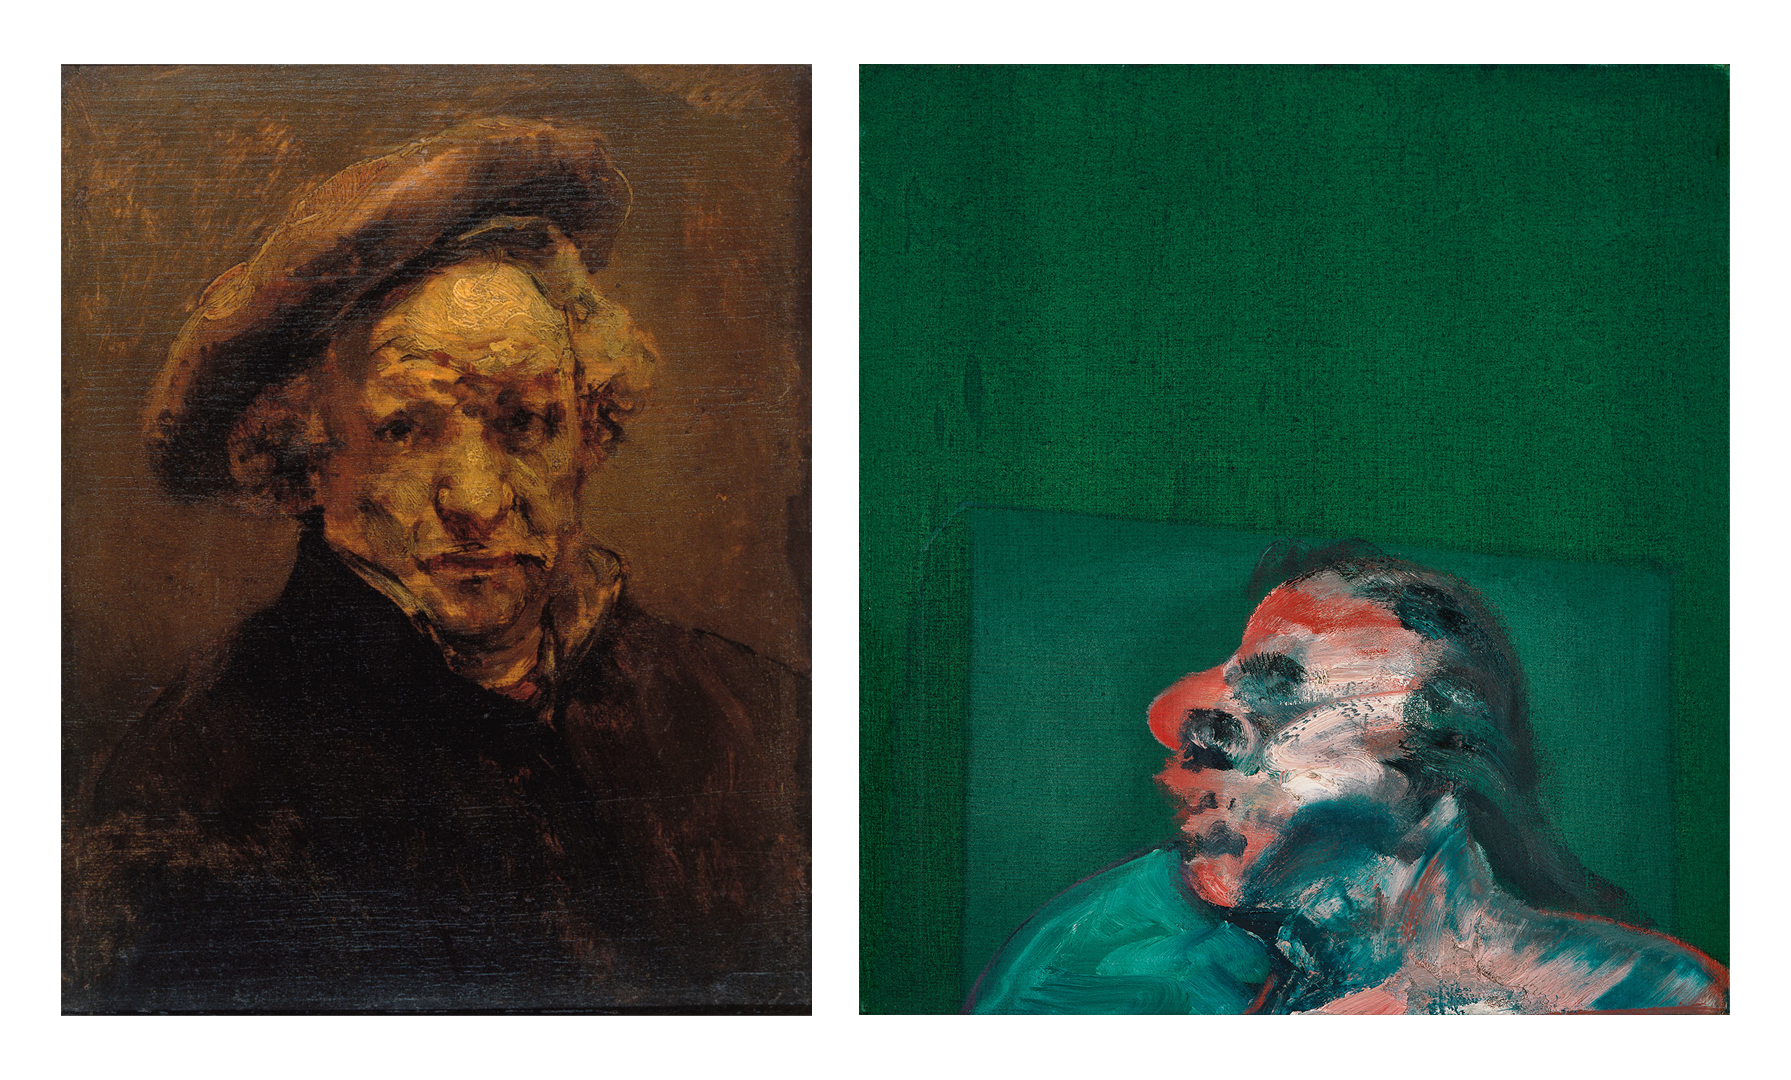 (Left) Rembrandt van Rijn, Self-Portrait with Beret, c.1659, Musée Granet, Aix-en-Provence © Hugo Maertens. All rights reserved.  (Right) Miss Muriel Belcher, 1959. Oil and aerosol paint on canvas. CR 59-13. © The Estate of Francis Bacon / DACS London 2021. All rights reserved.